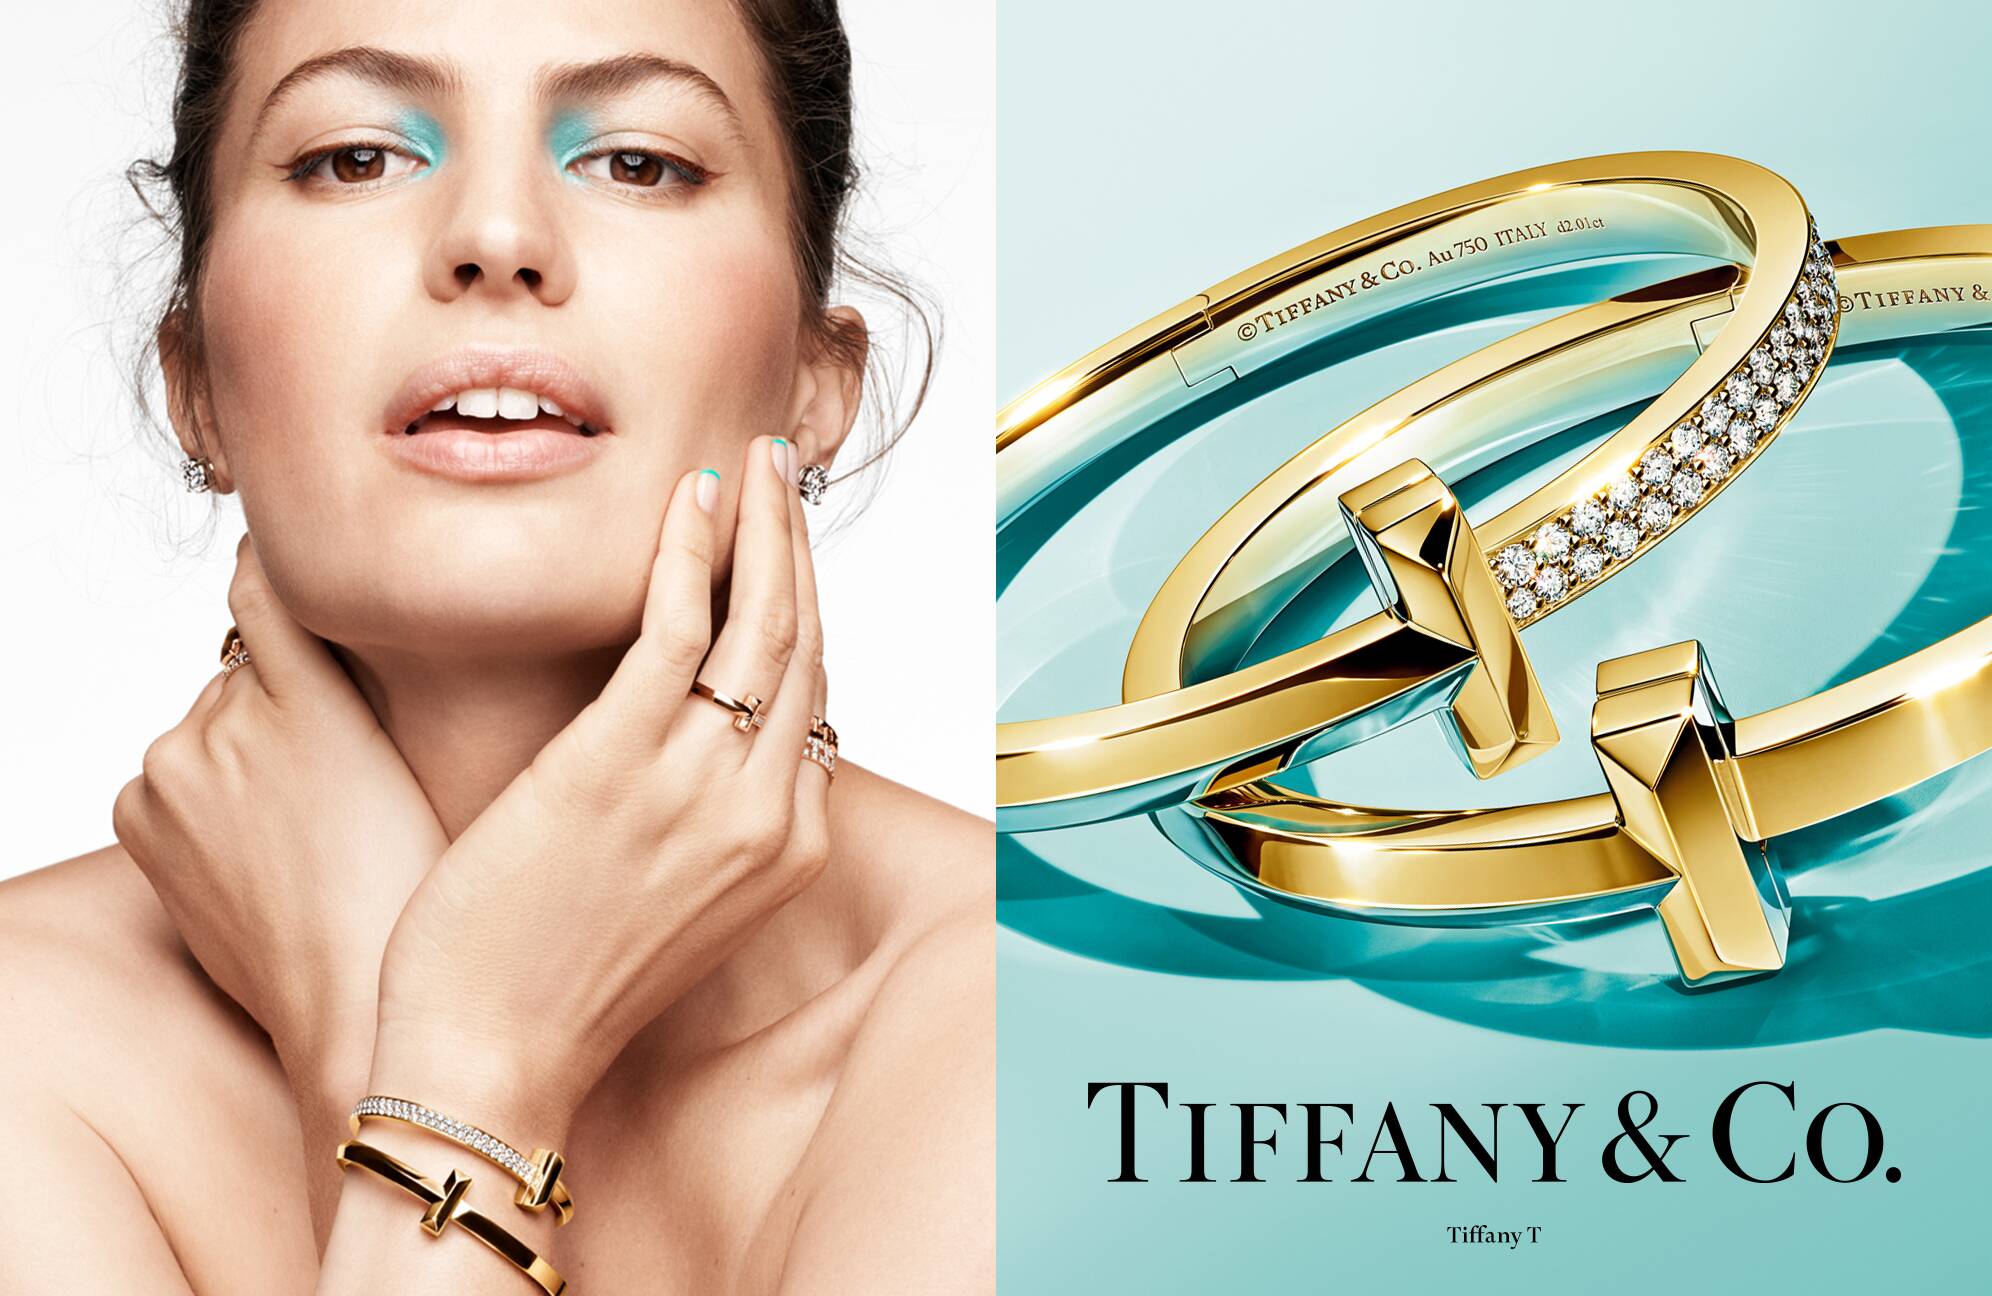 Tiffany deal would give LVMH edge in jewelry